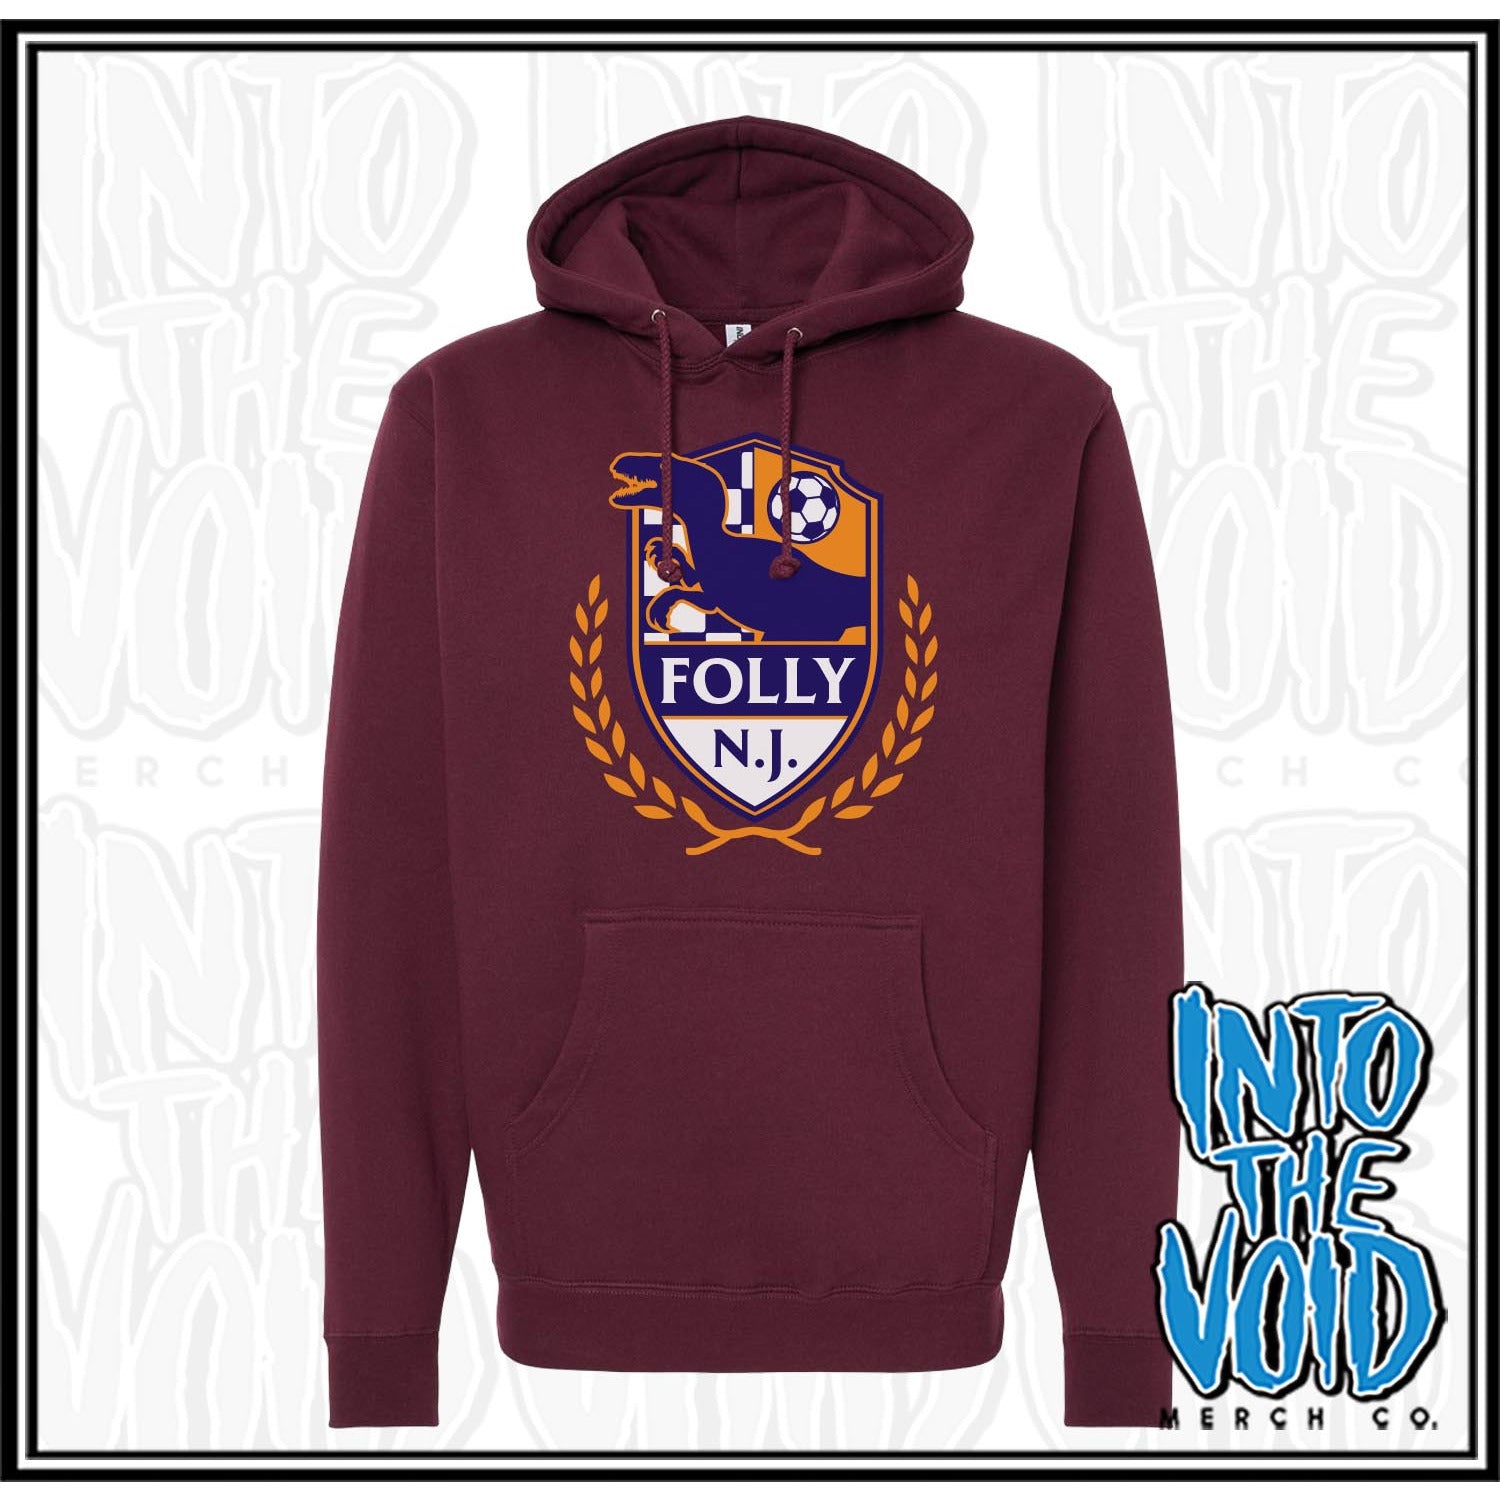 FOLLY - SOCCER CREST - Hooded Pullover Sweatshirt - INTO THE VOID Merch Co.